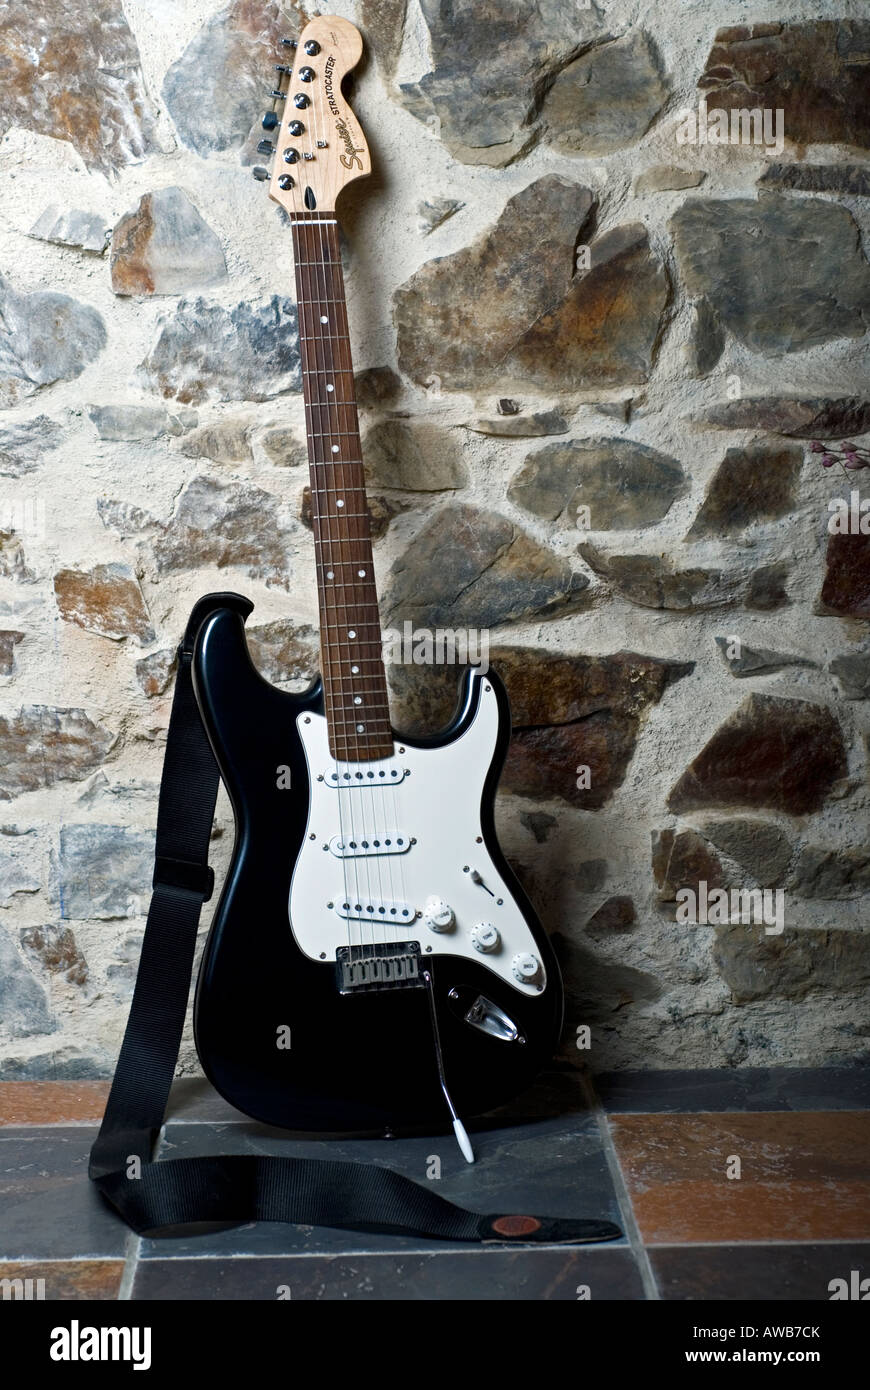 Image of a black and white electric guitar leaning against a wall Stock Photo